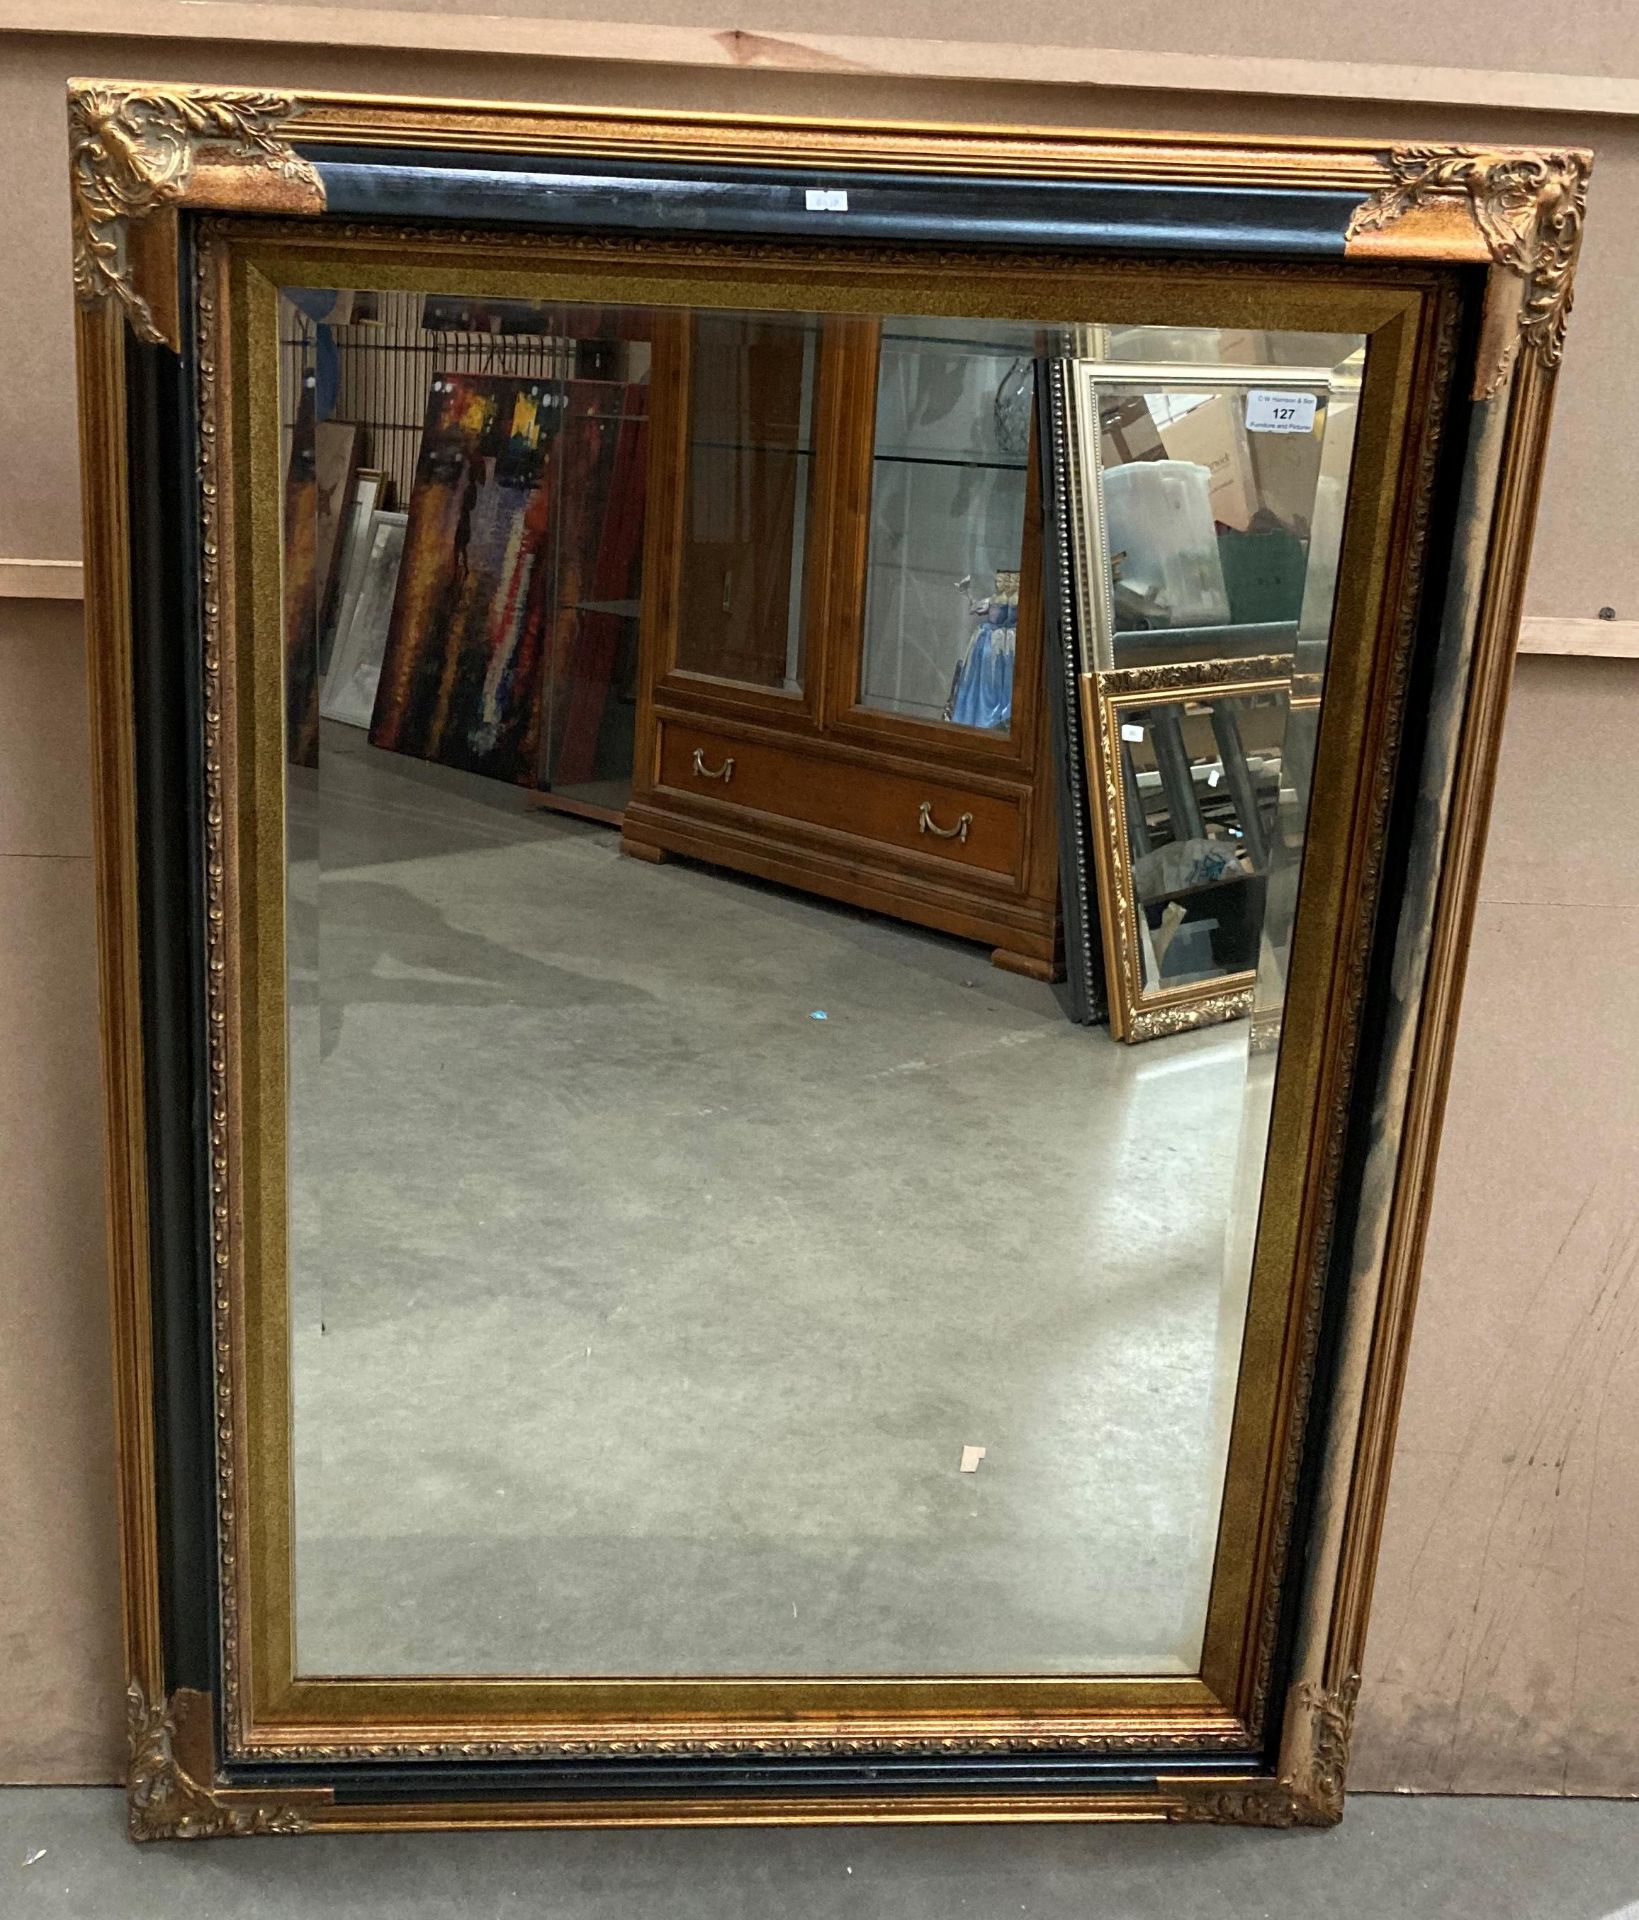 An ornate gilt and ebony effect famed wall mirror,